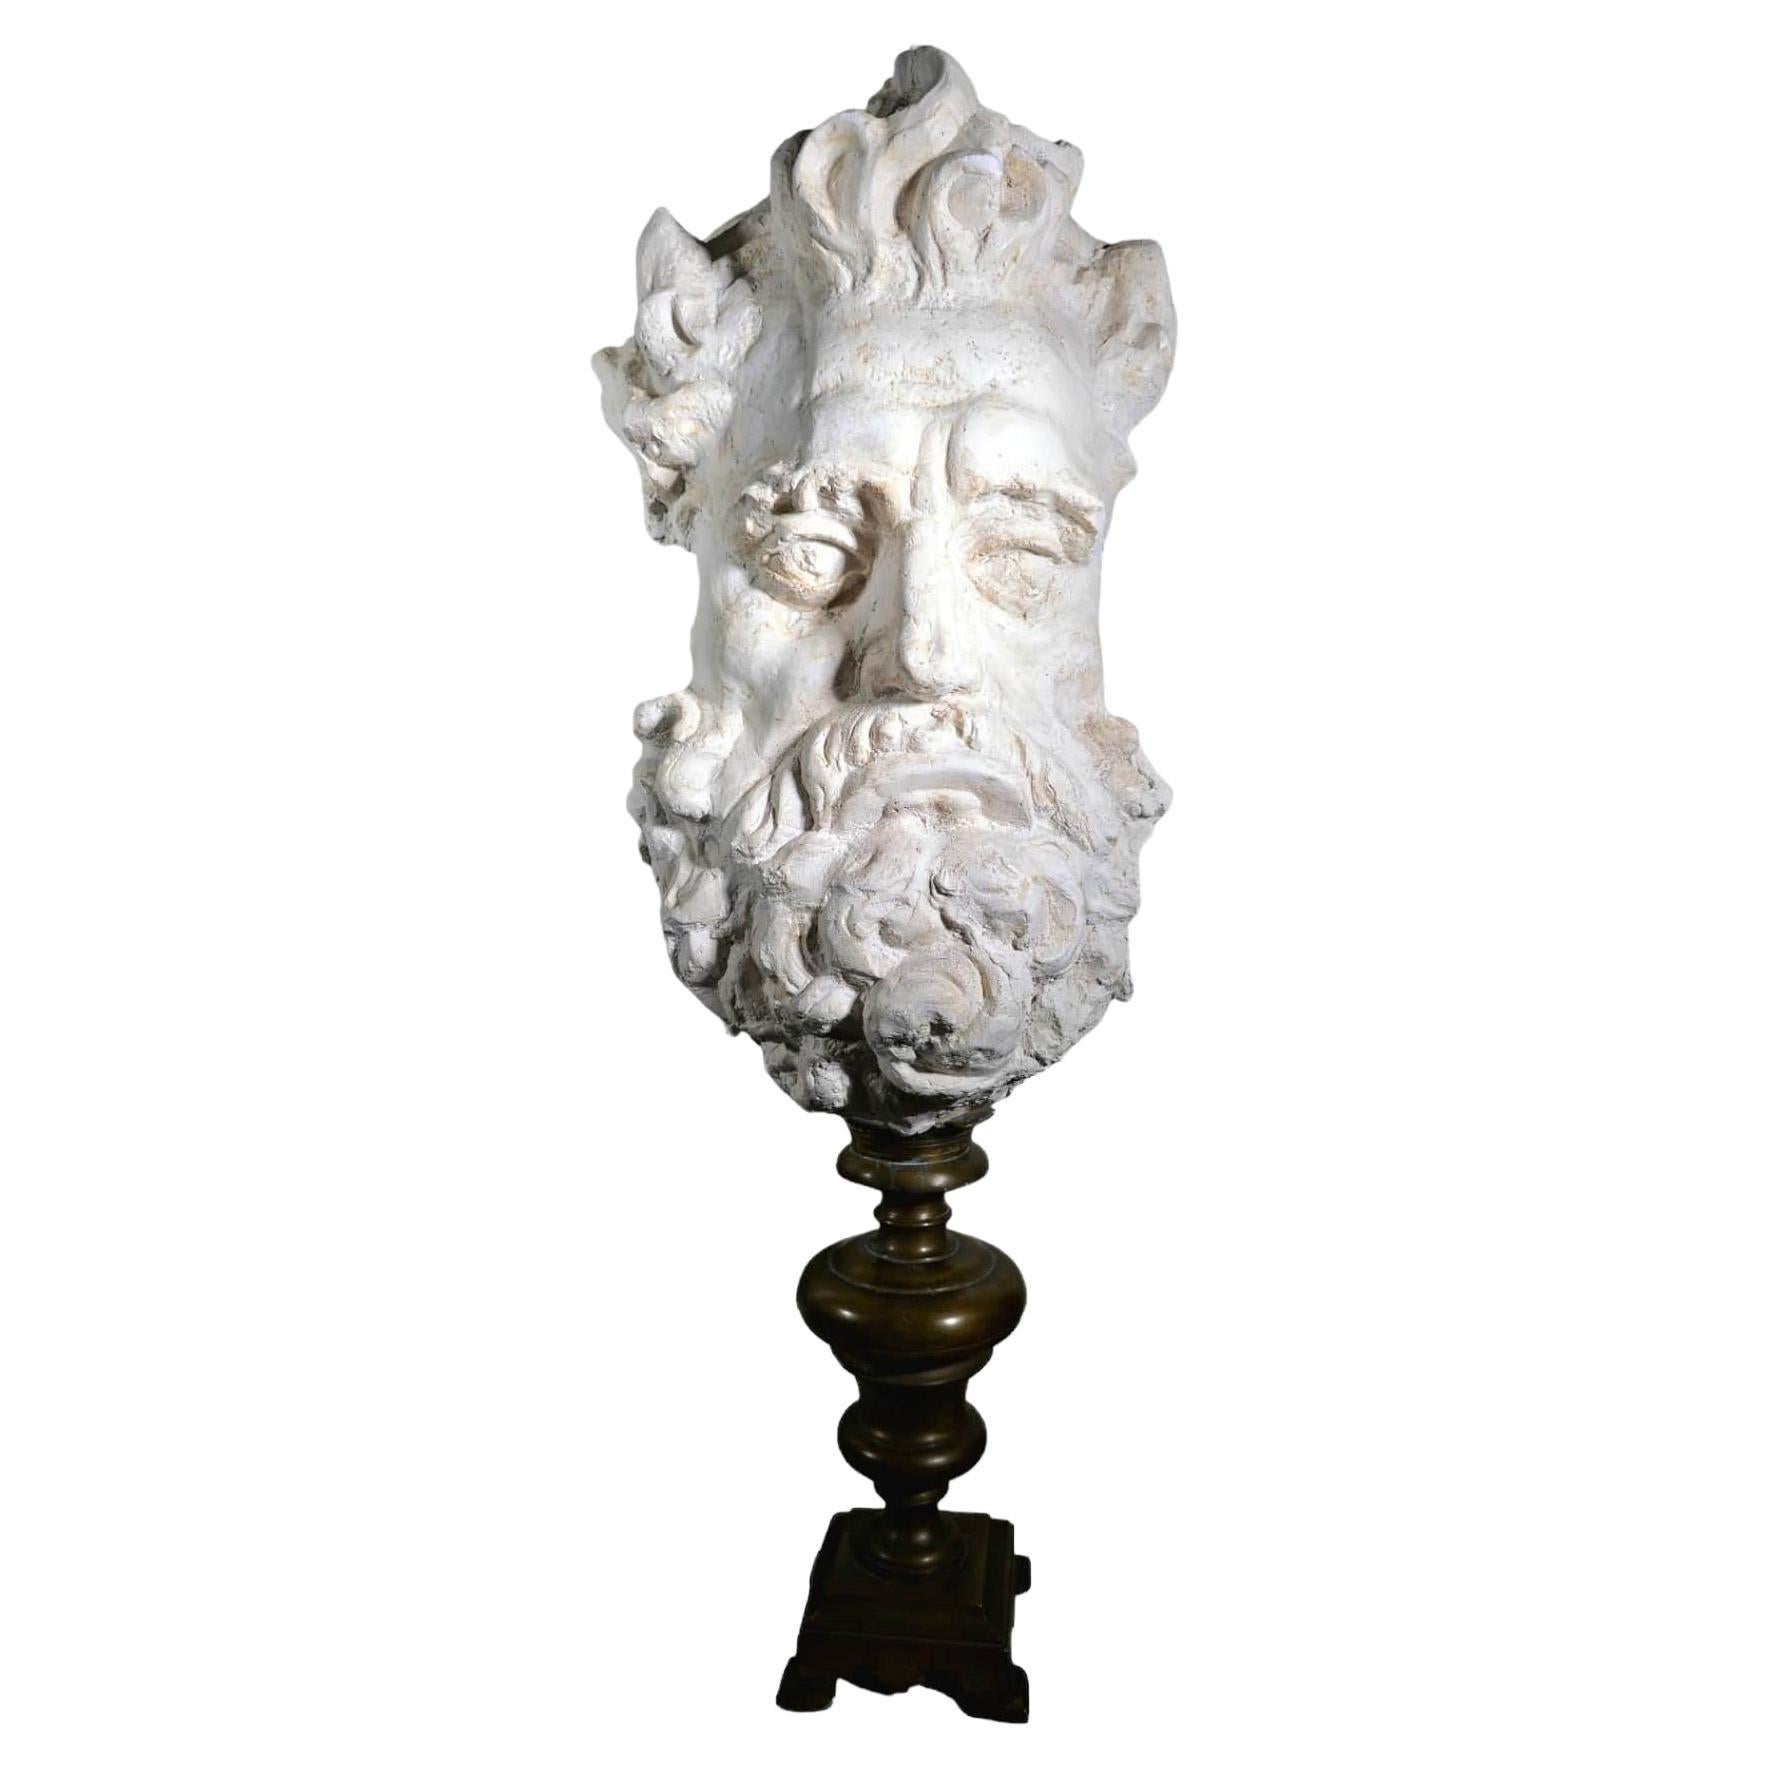 Grand Sculpture of Zeus from the 19th Century